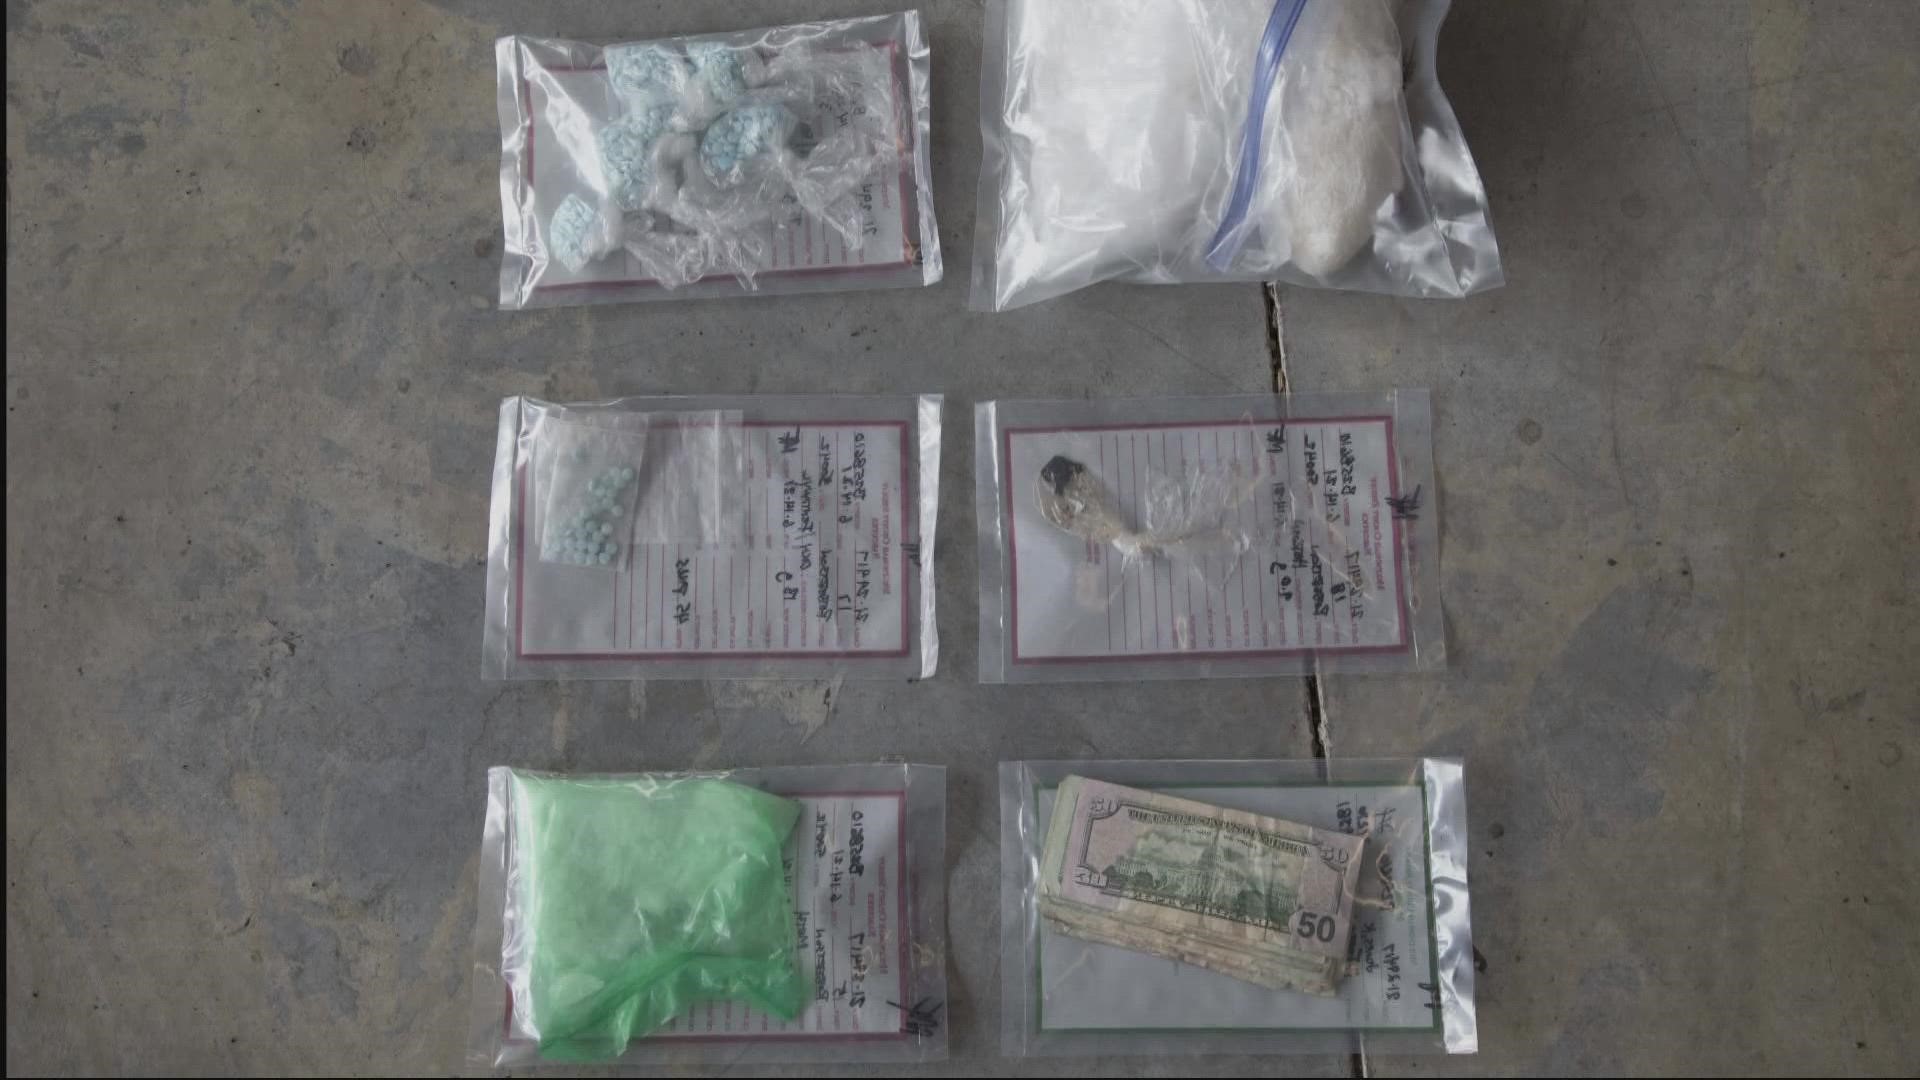 Fentanyl is "everywhere" and officers are seizing more guns than ever, a Multnomah County Sheriff's Office sergeant explained.